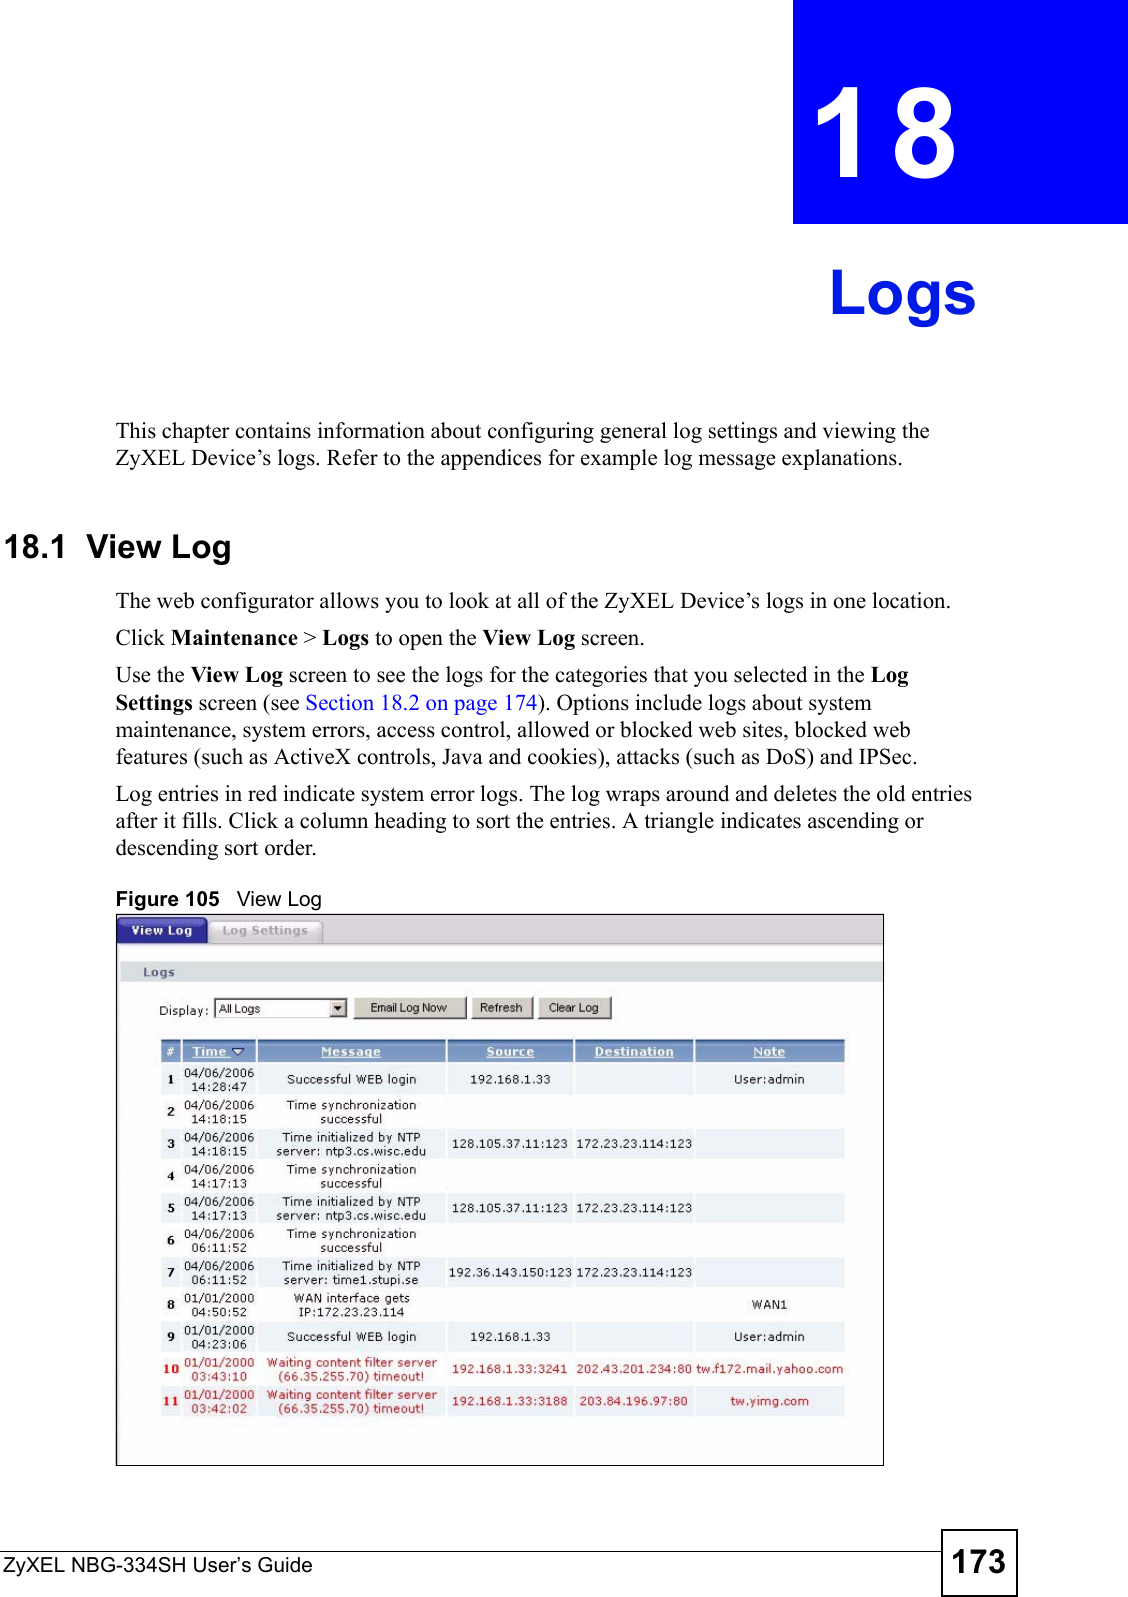 ZyXEL NBG-334SH User’s Guide 173CHAPTER  18 LogsThis chapter contains information about configuring general log settings and viewing the ZyXEL Device’s logs. Refer to the appendices for example log message explanations.18.1  View Log The web configurator allows you to look at all of the ZyXEL Device’s logs in one location. Click Maintenance &gt; Logs to open the View Log screen. Use the View Log screen to see the logs for the categories that you selected in the Log Settings screen (see Section 18.2 on page 174). Options include logs about system maintenance, system errors, access control, allowed or blocked web sites, blocked web features (such as ActiveX controls, Java and cookies), attacks (such as DoS) and IPSec.Log entries in red indicate system error logs. The log wraps around and deletes the old entries after it fills. Click a column heading to sort the entries. A triangle indicates ascending or descending sort order. Figure 105   View Log